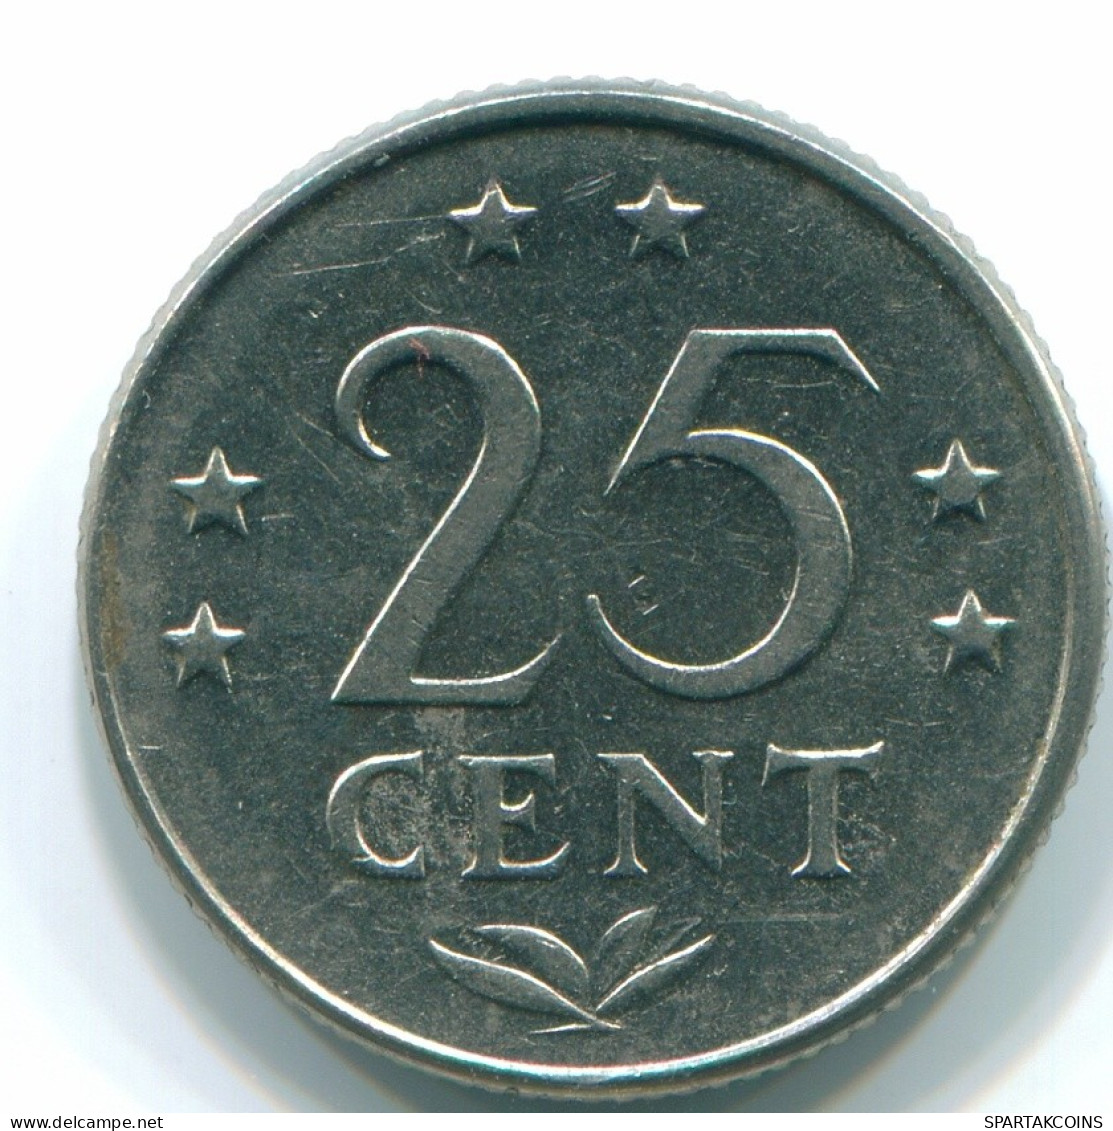 25 CENTS 1975 NETHERLANDS ANTILLES Nickel Colonial Coin #S11613.U.A - Netherlands Antilles